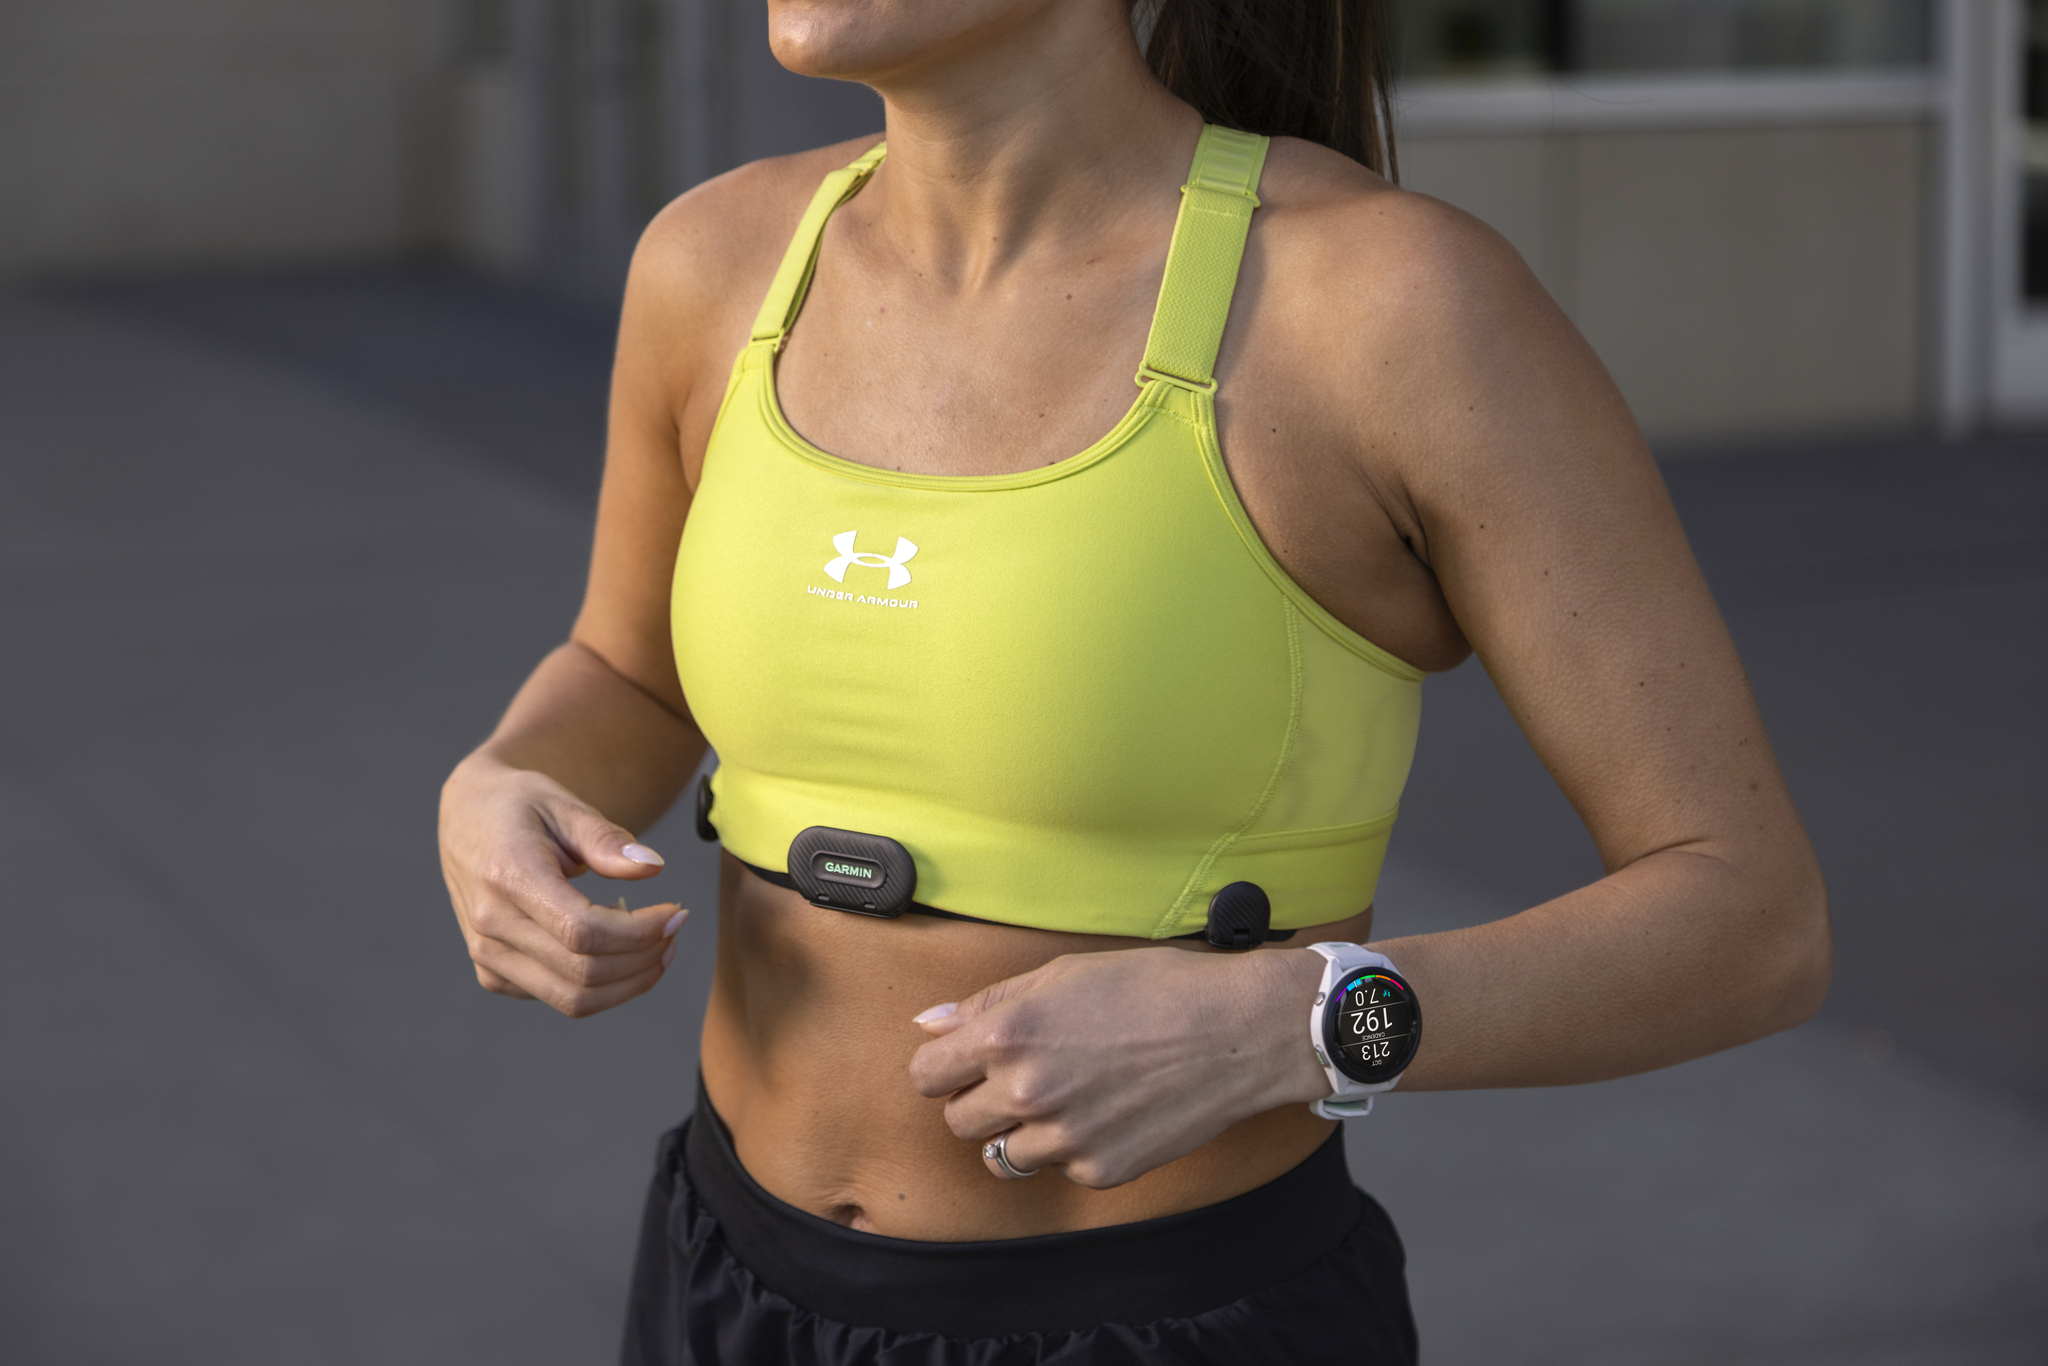 Garmin HRM-FIT review - compatible with 3rd party sports bras, is